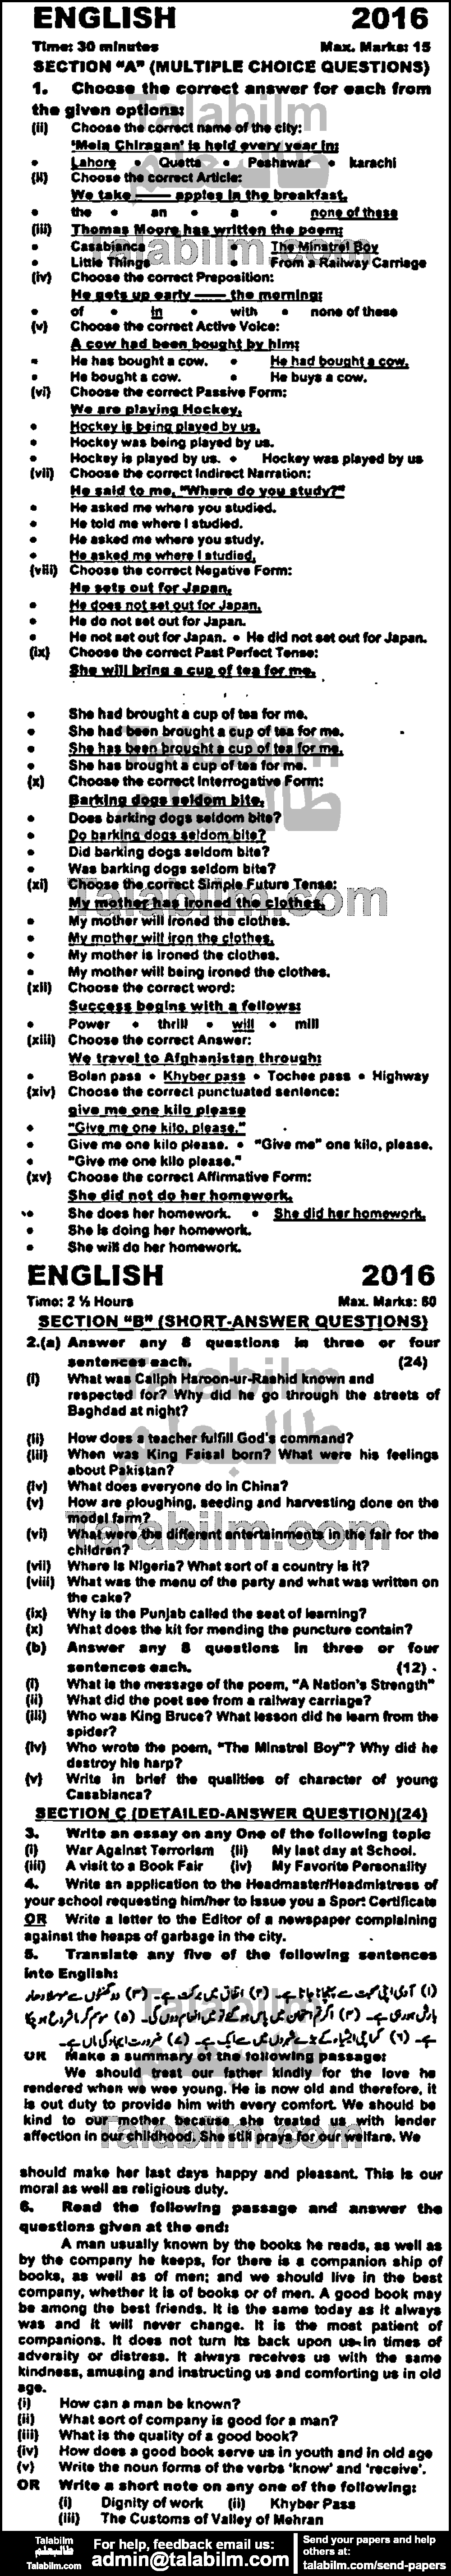 English 0 past paper for 2016 Group-I